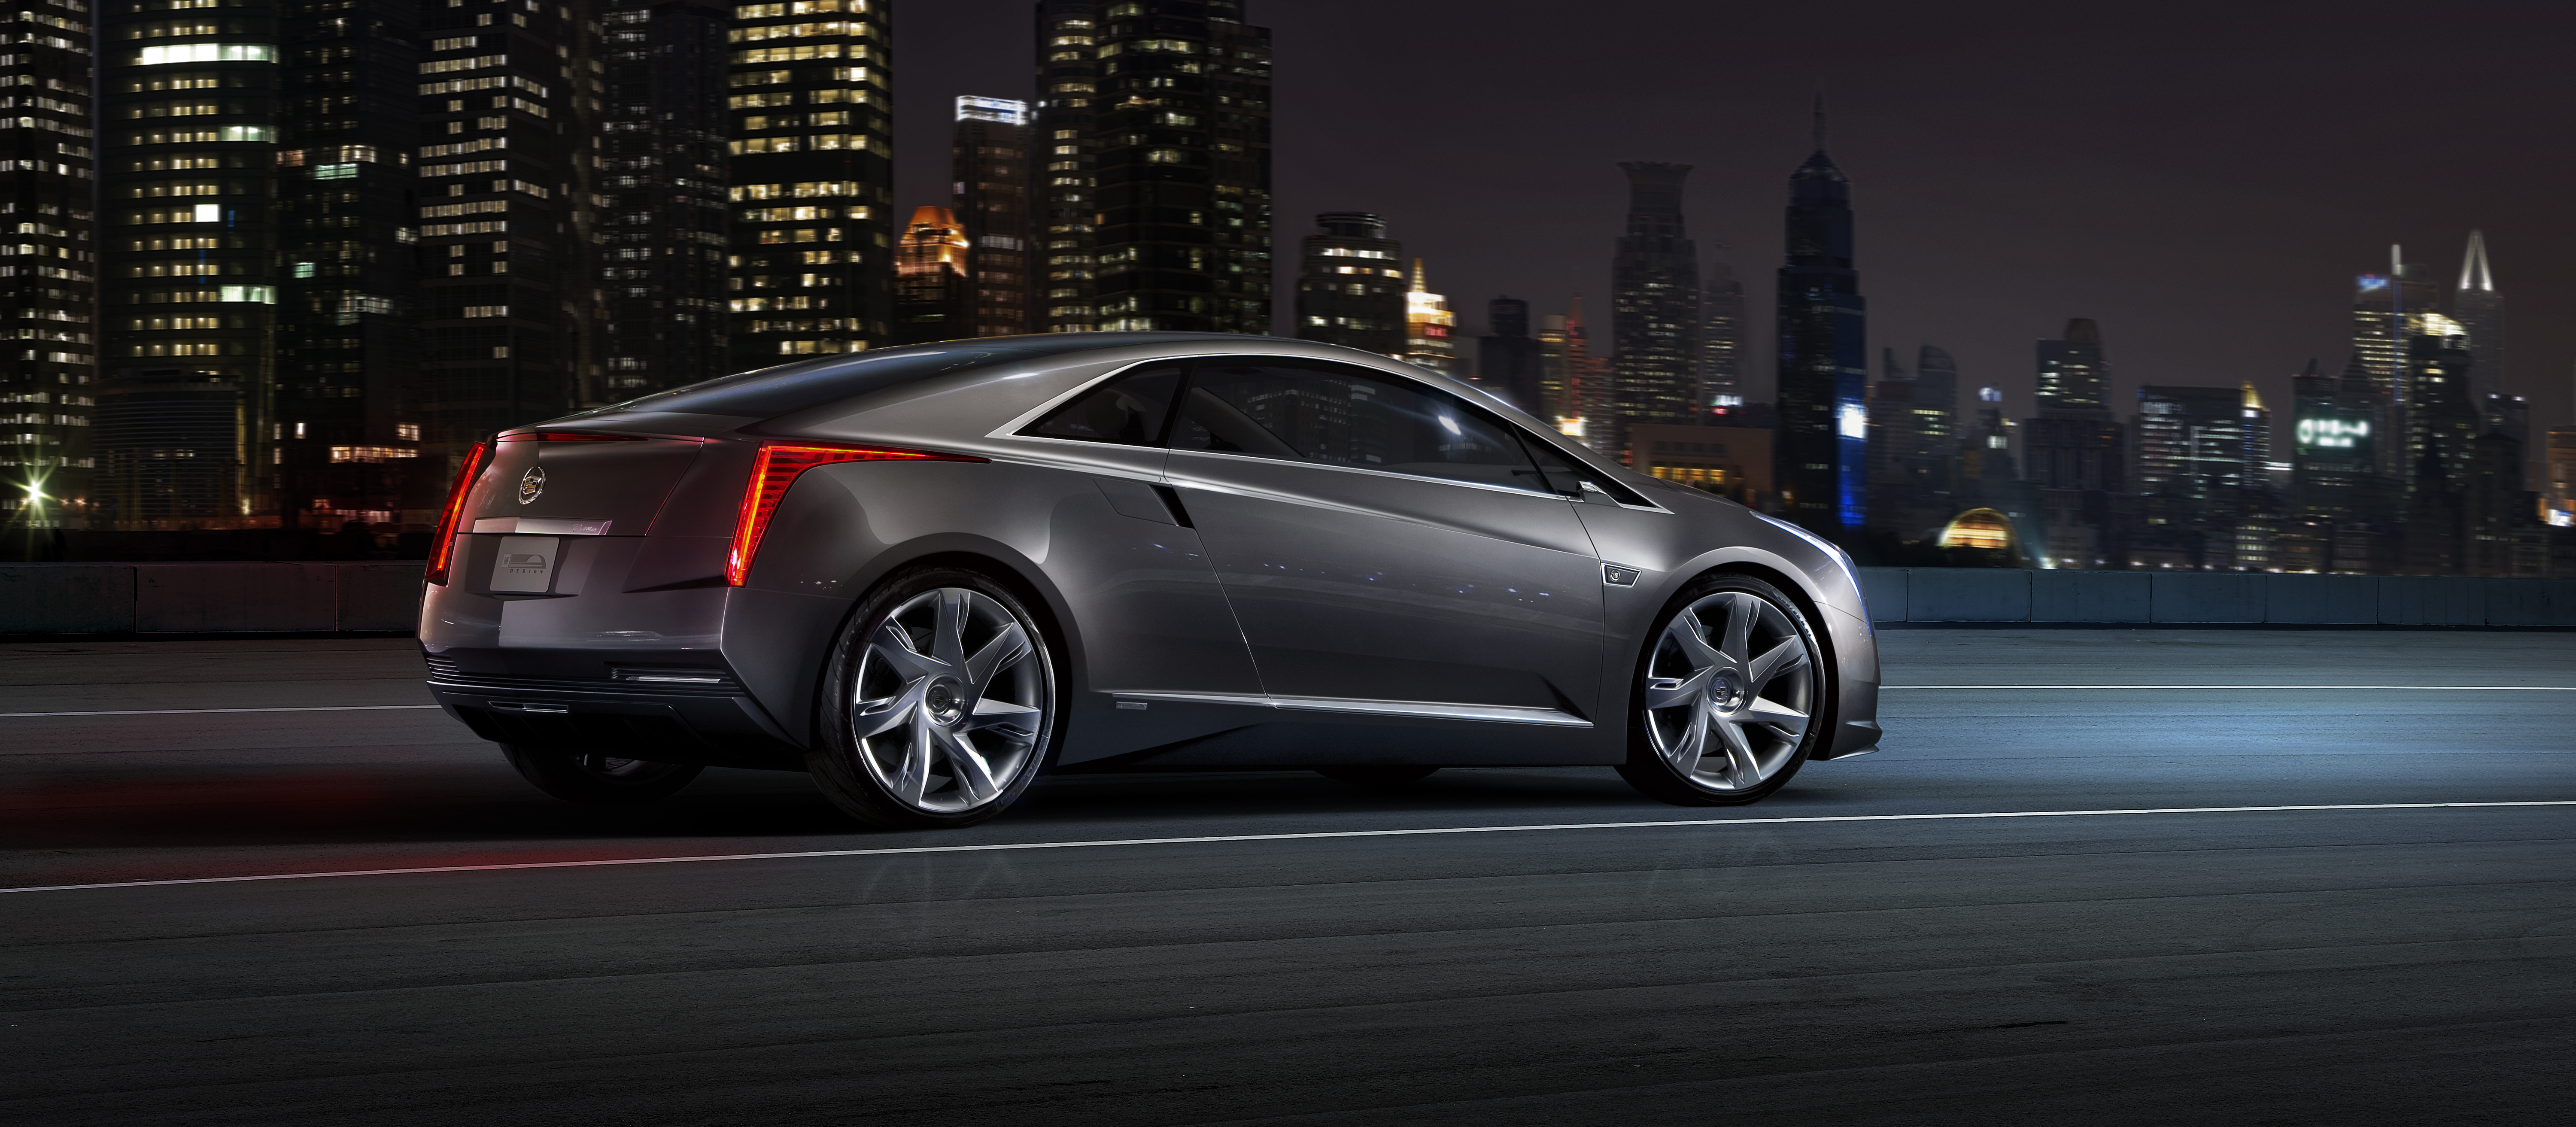 Electric Concept Car Comes to Life as Cadillac ELR